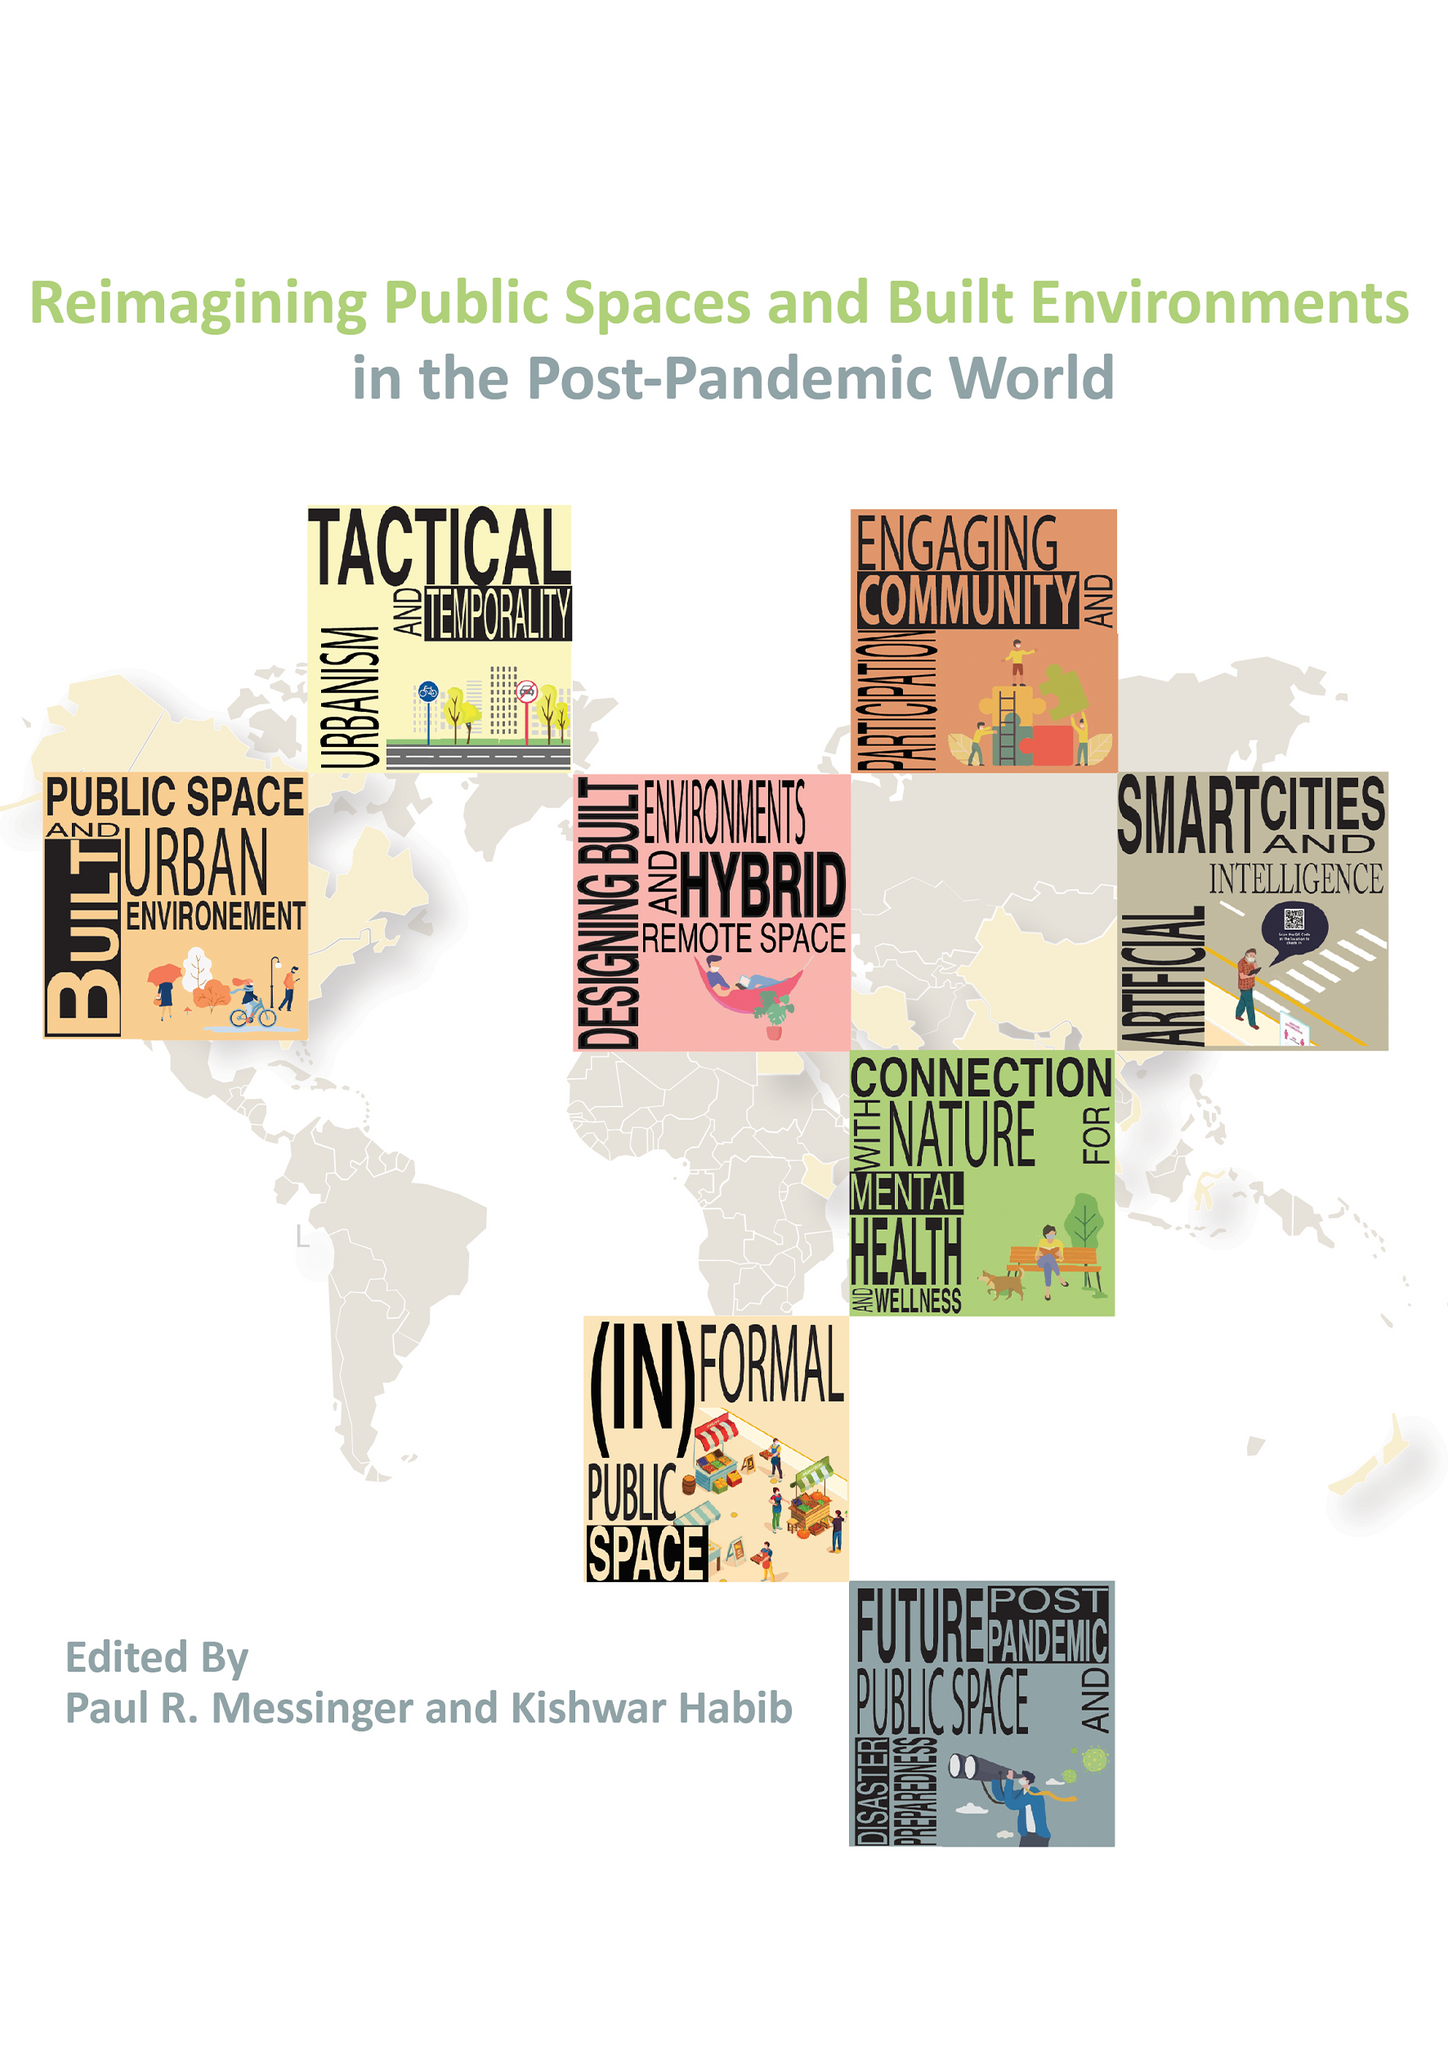 Reimagining Public Spaces and Built Environments in the Post-Pandemic World